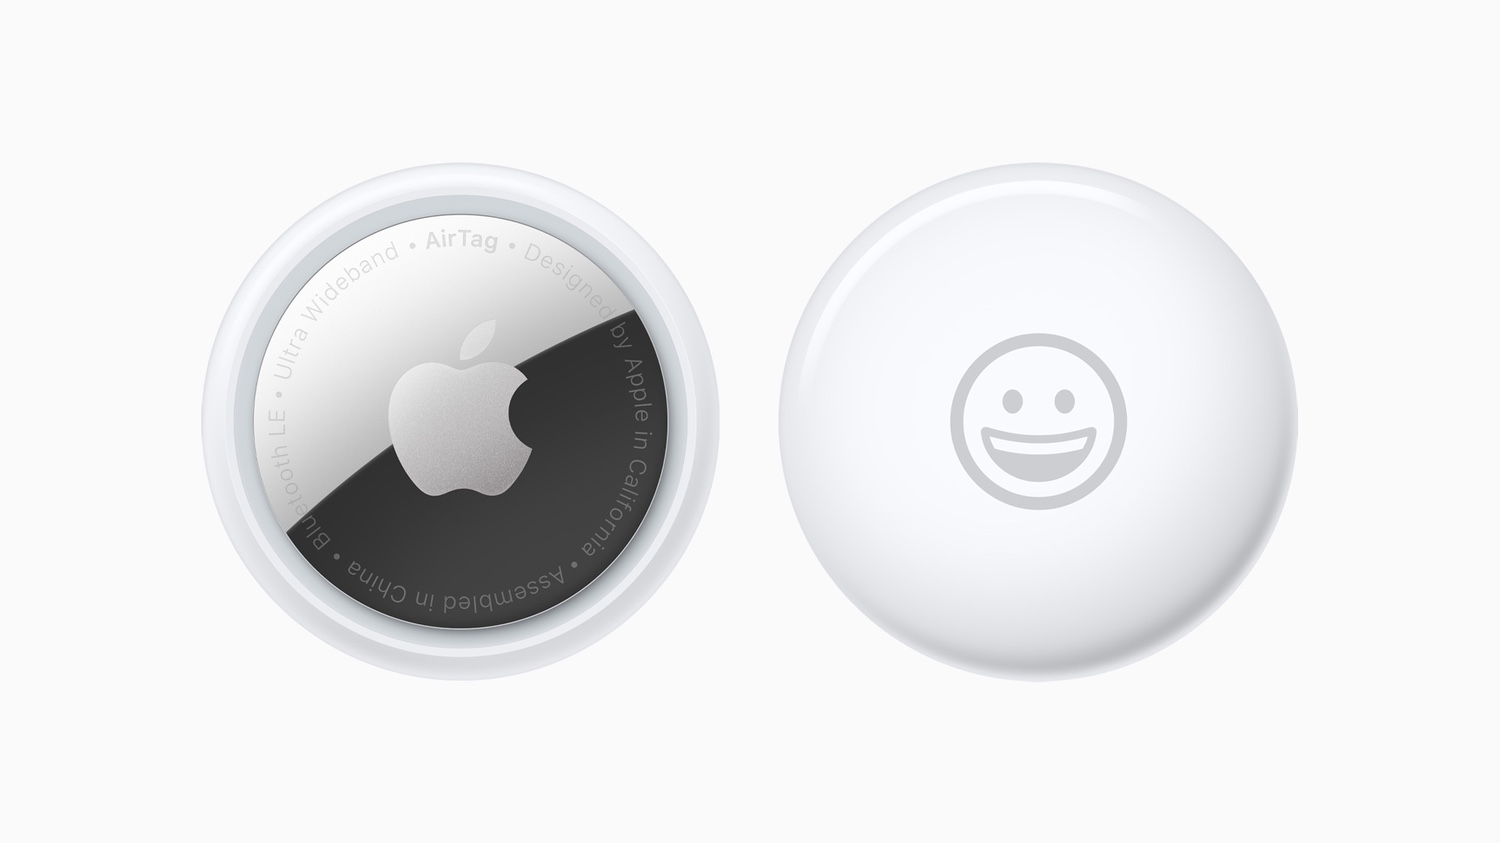 Get more use out of Apple AirTags with these accessories